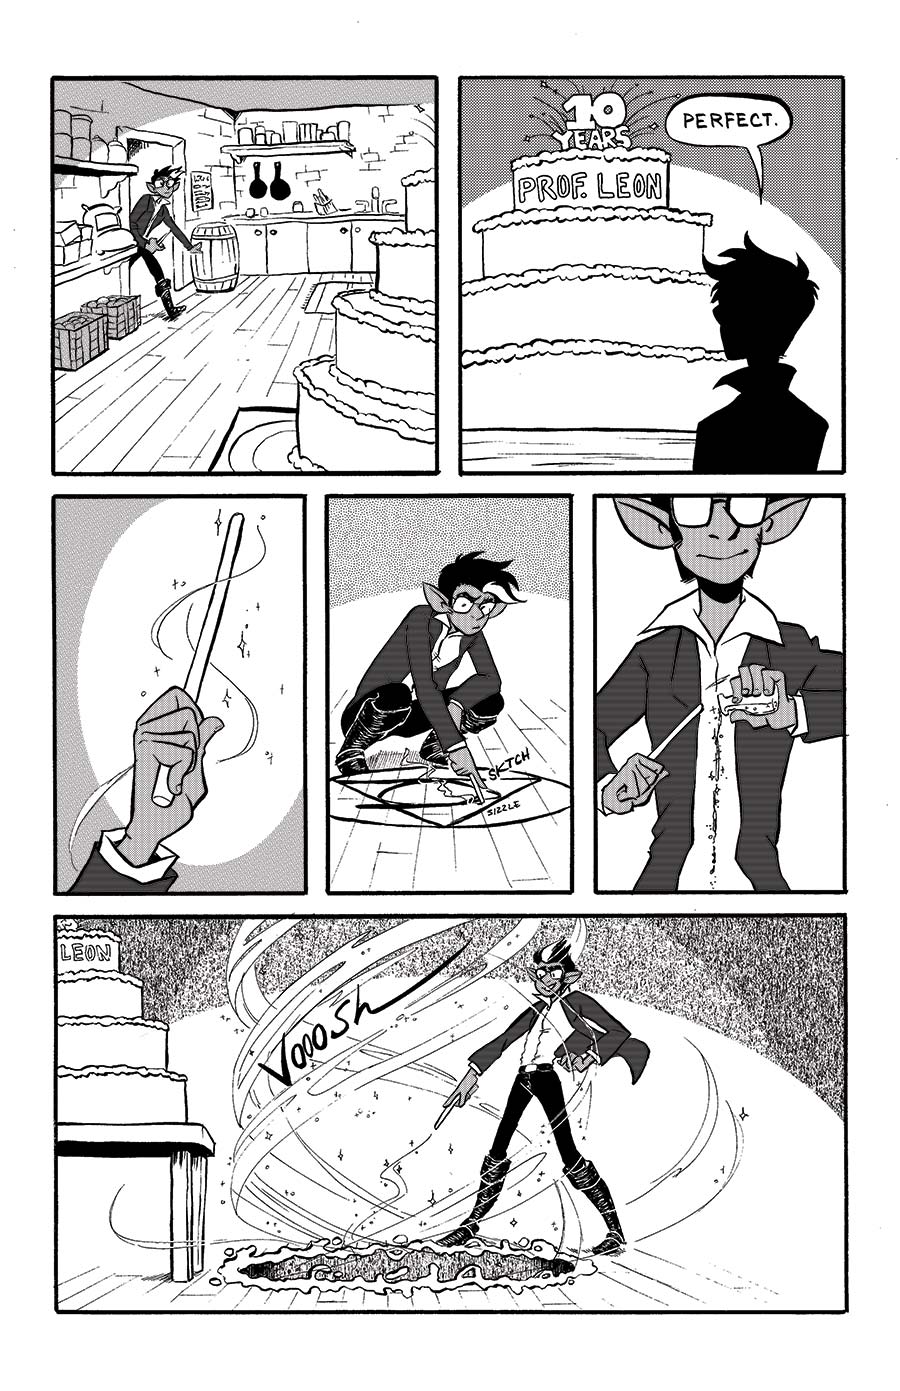 remember in chapter one when Toivo said he was working on his teleportation magic thesis?